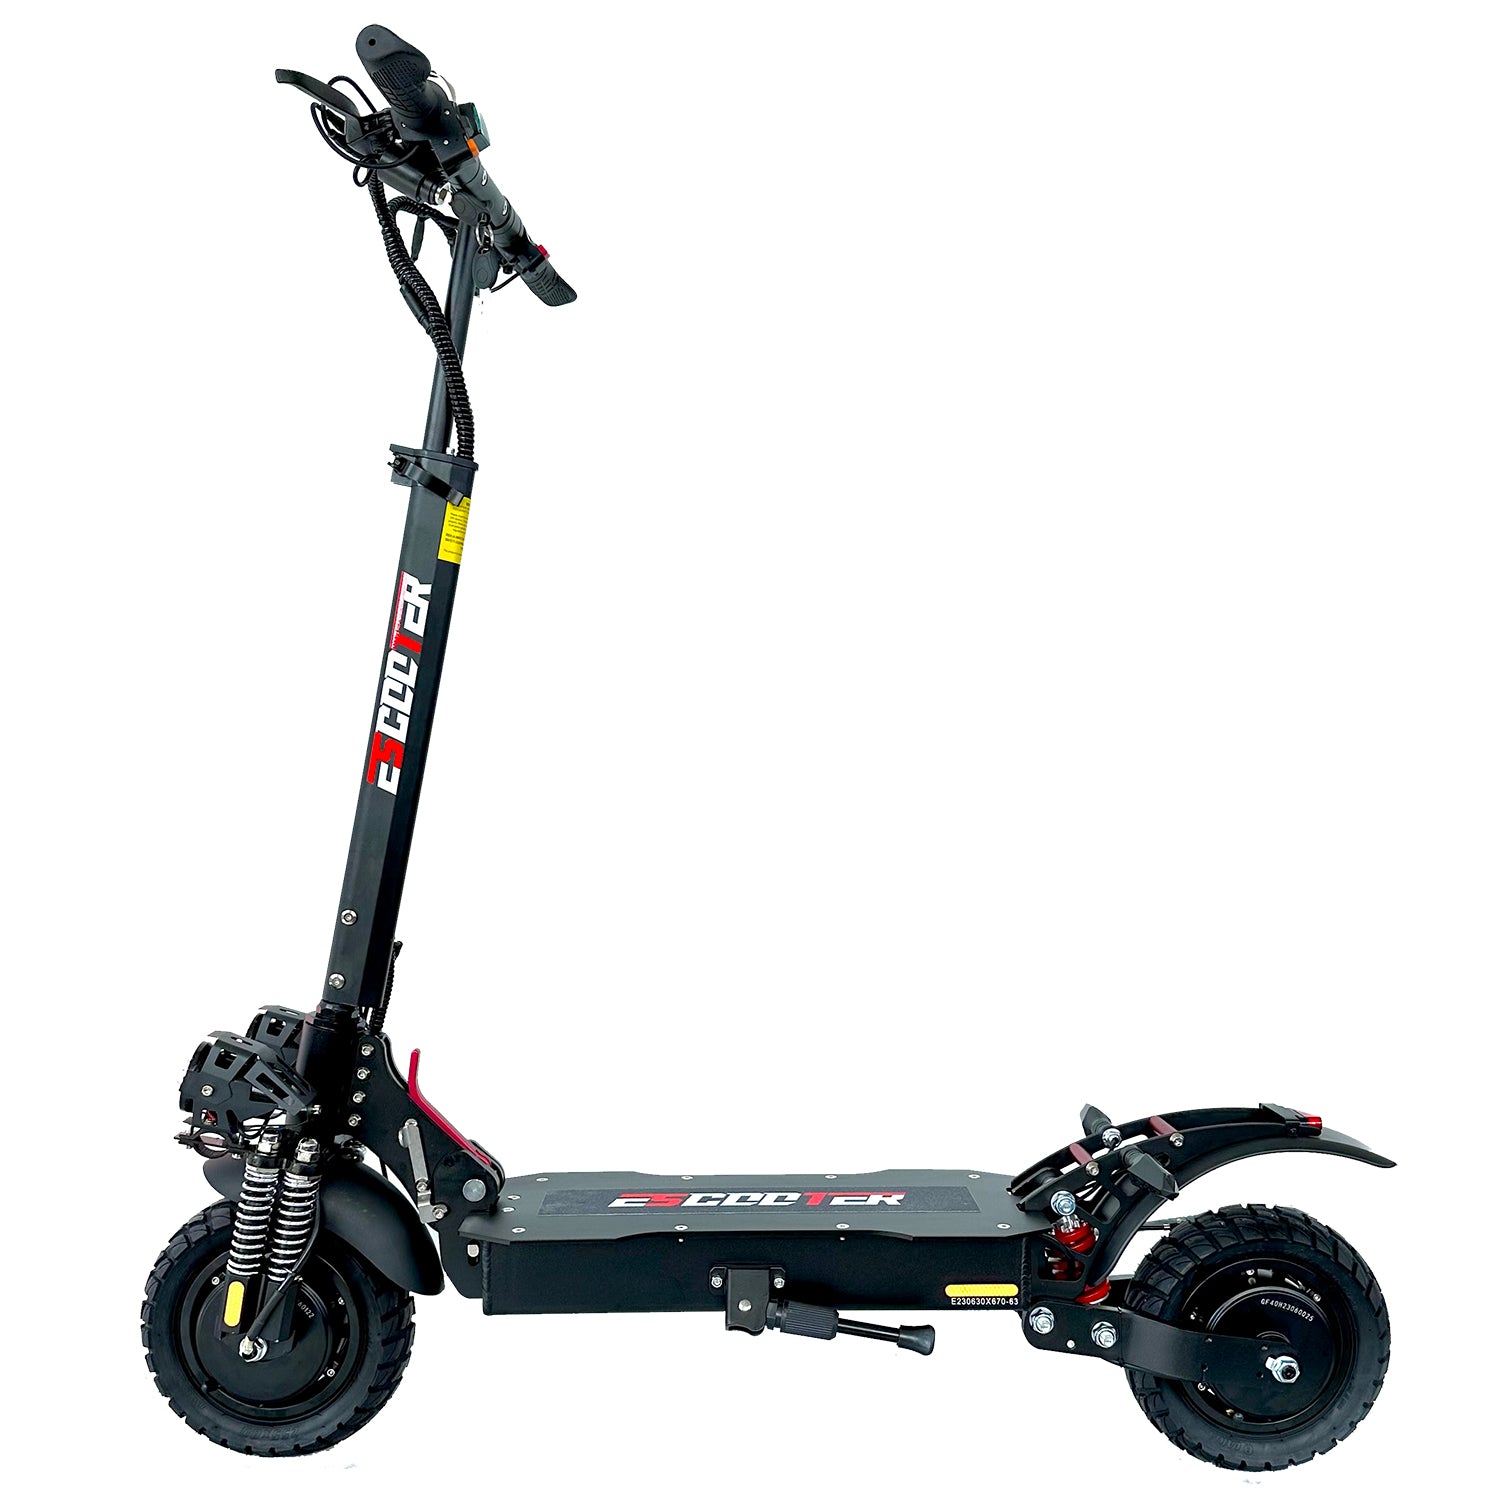 USA Warehouse X6 Model 48v 2400w 21ah Dual Motor 10inch 55-55kmh Adult Electric Scooter